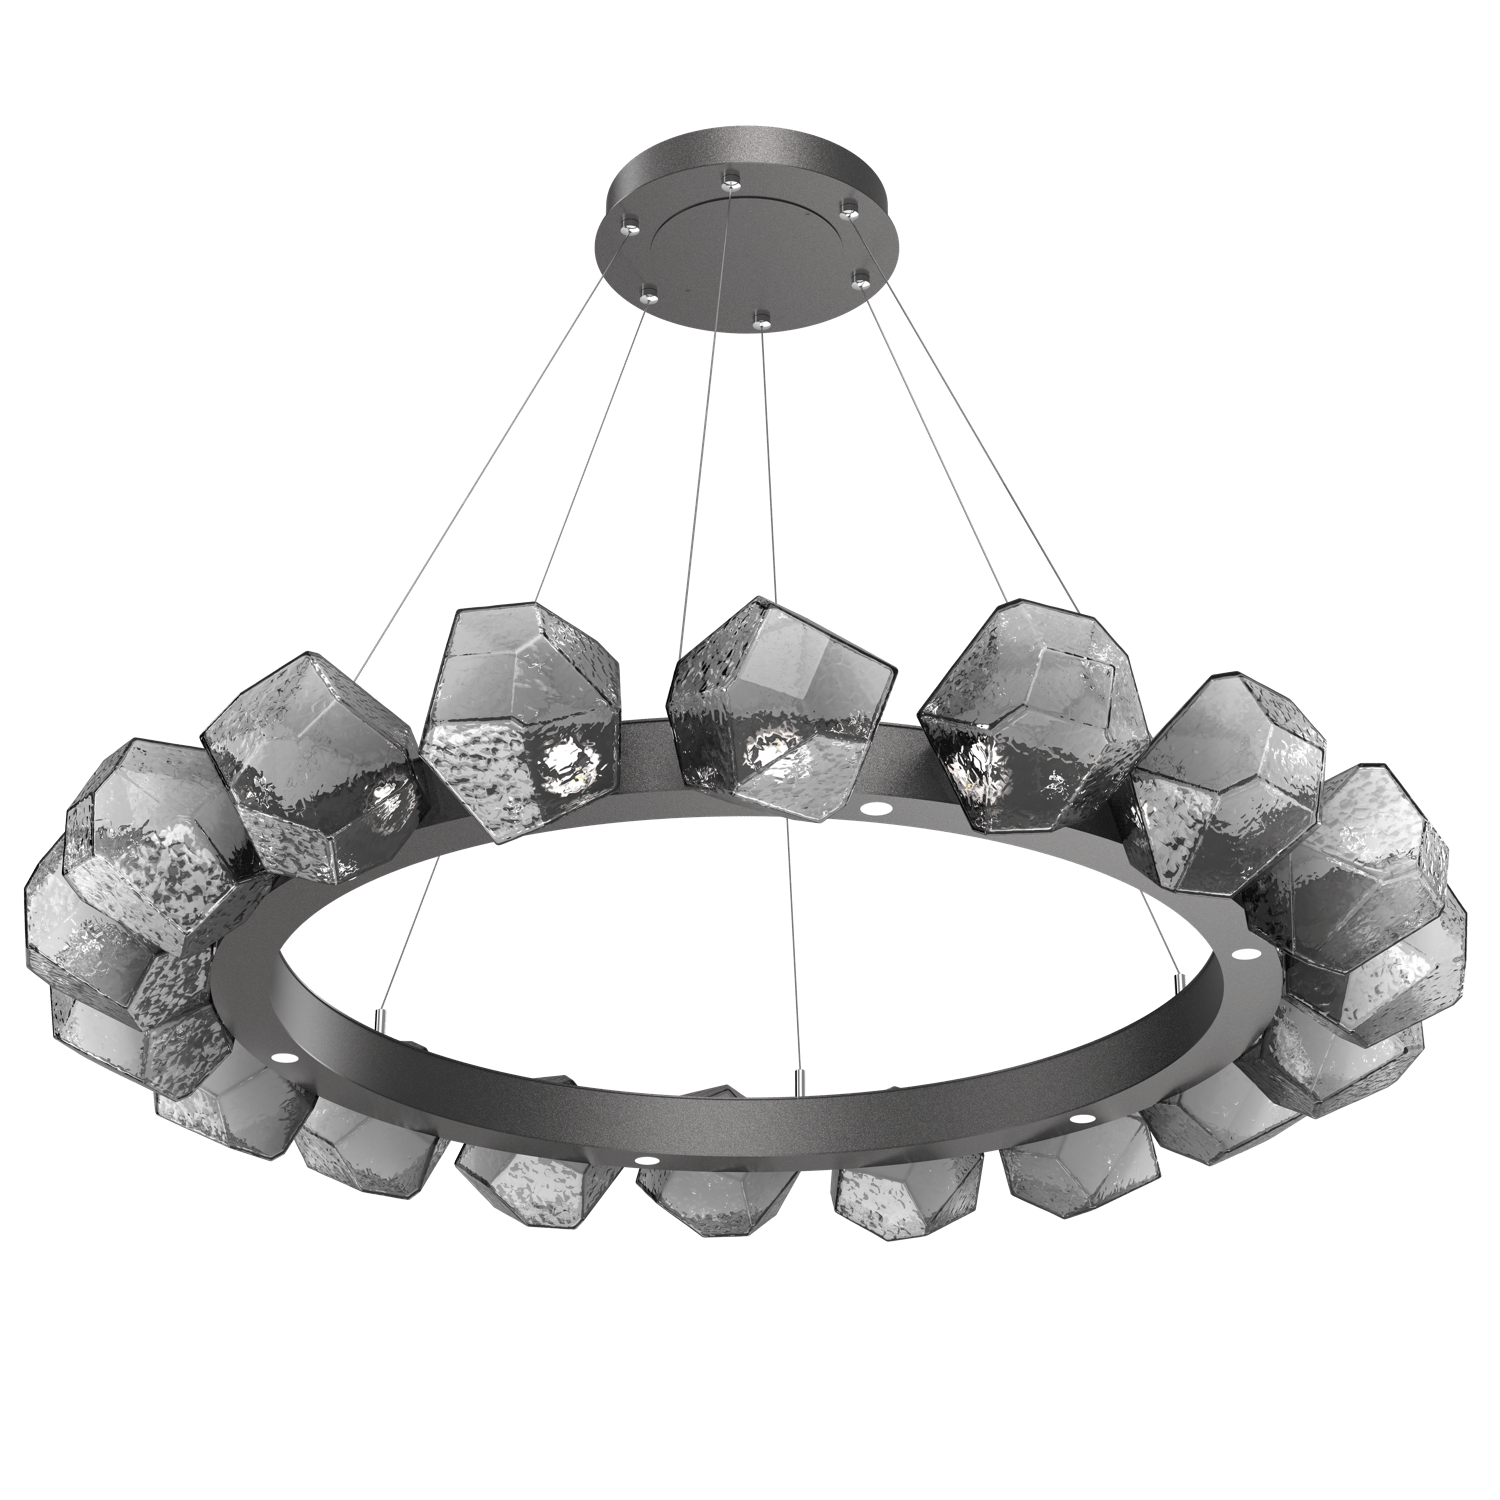 CHB0039-48-GP-S-Hammerton-Studio-Gem-48-inch-radial-ring-chandelier-with-graphite-finish-and-smoke-blown-glass-shades-and-LED-lamping